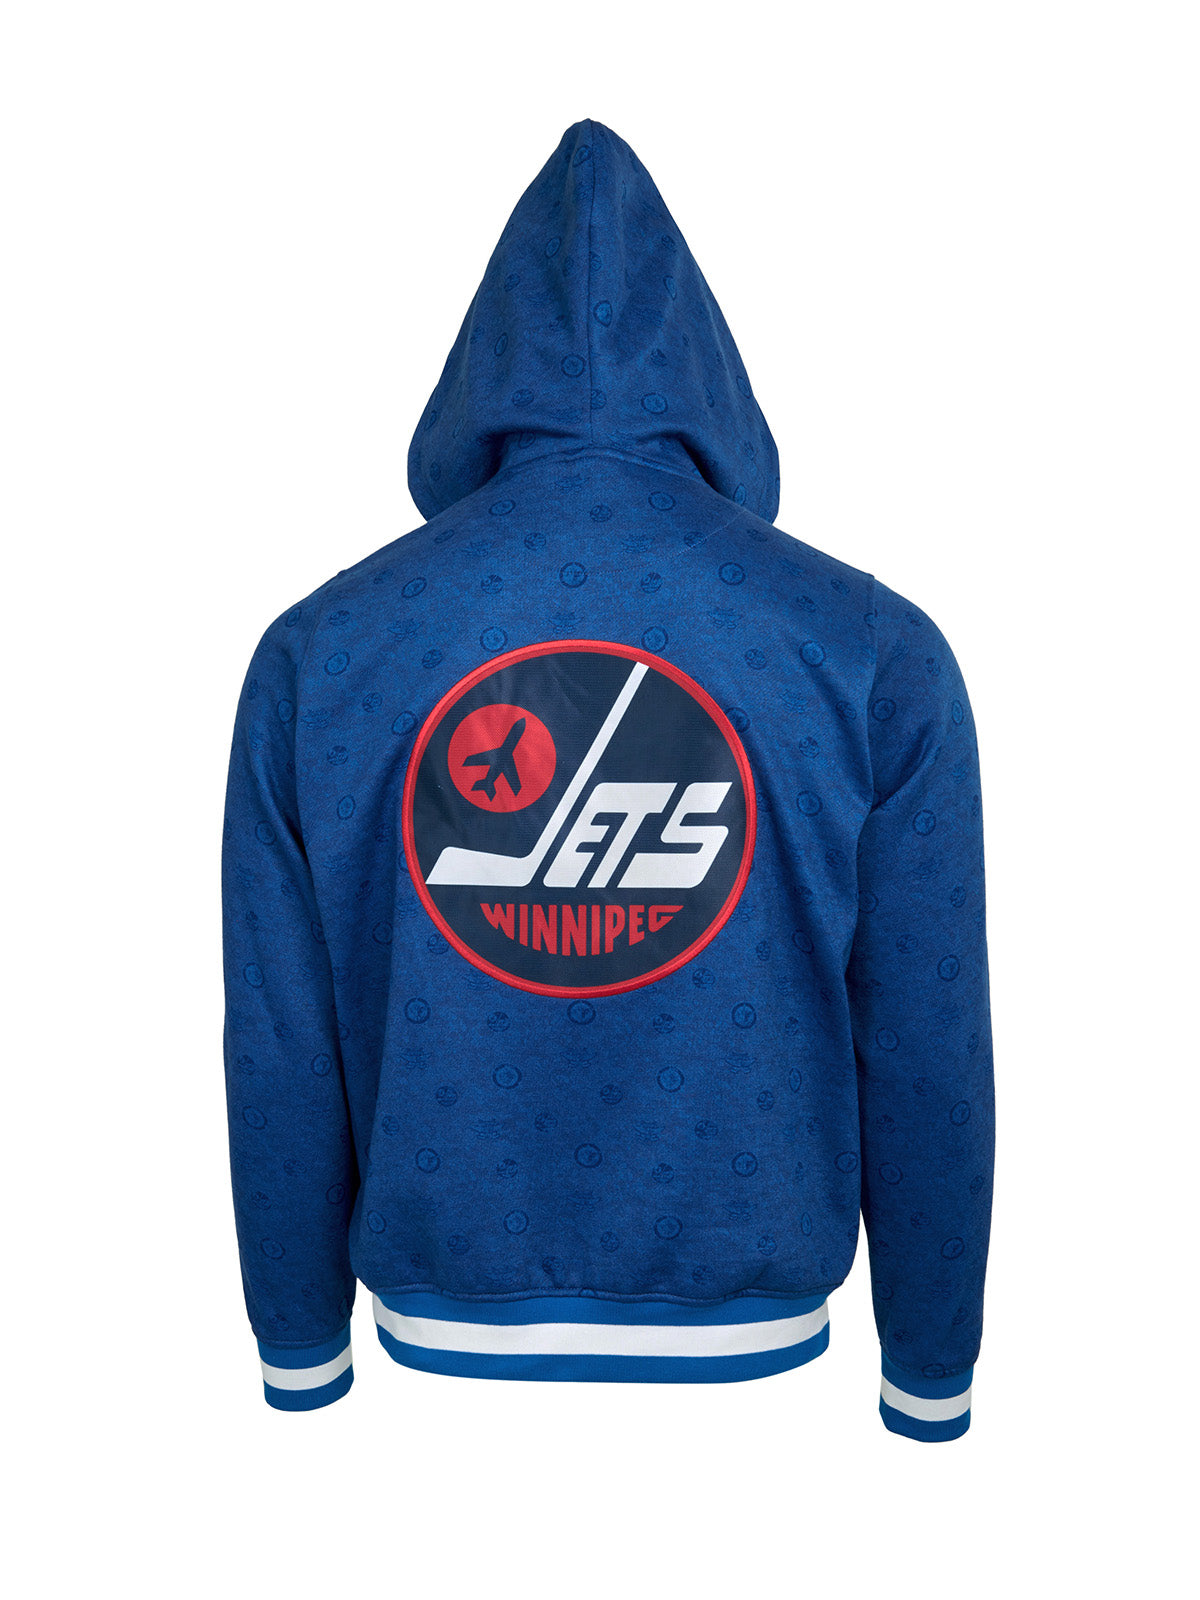 Winnipeg Jets Hoodie - Show your team spirit, with the iconic team logo patch centered on the back, and proudly display your Winnipeg Jets support in their team colors with this NHL hockey hoodie.